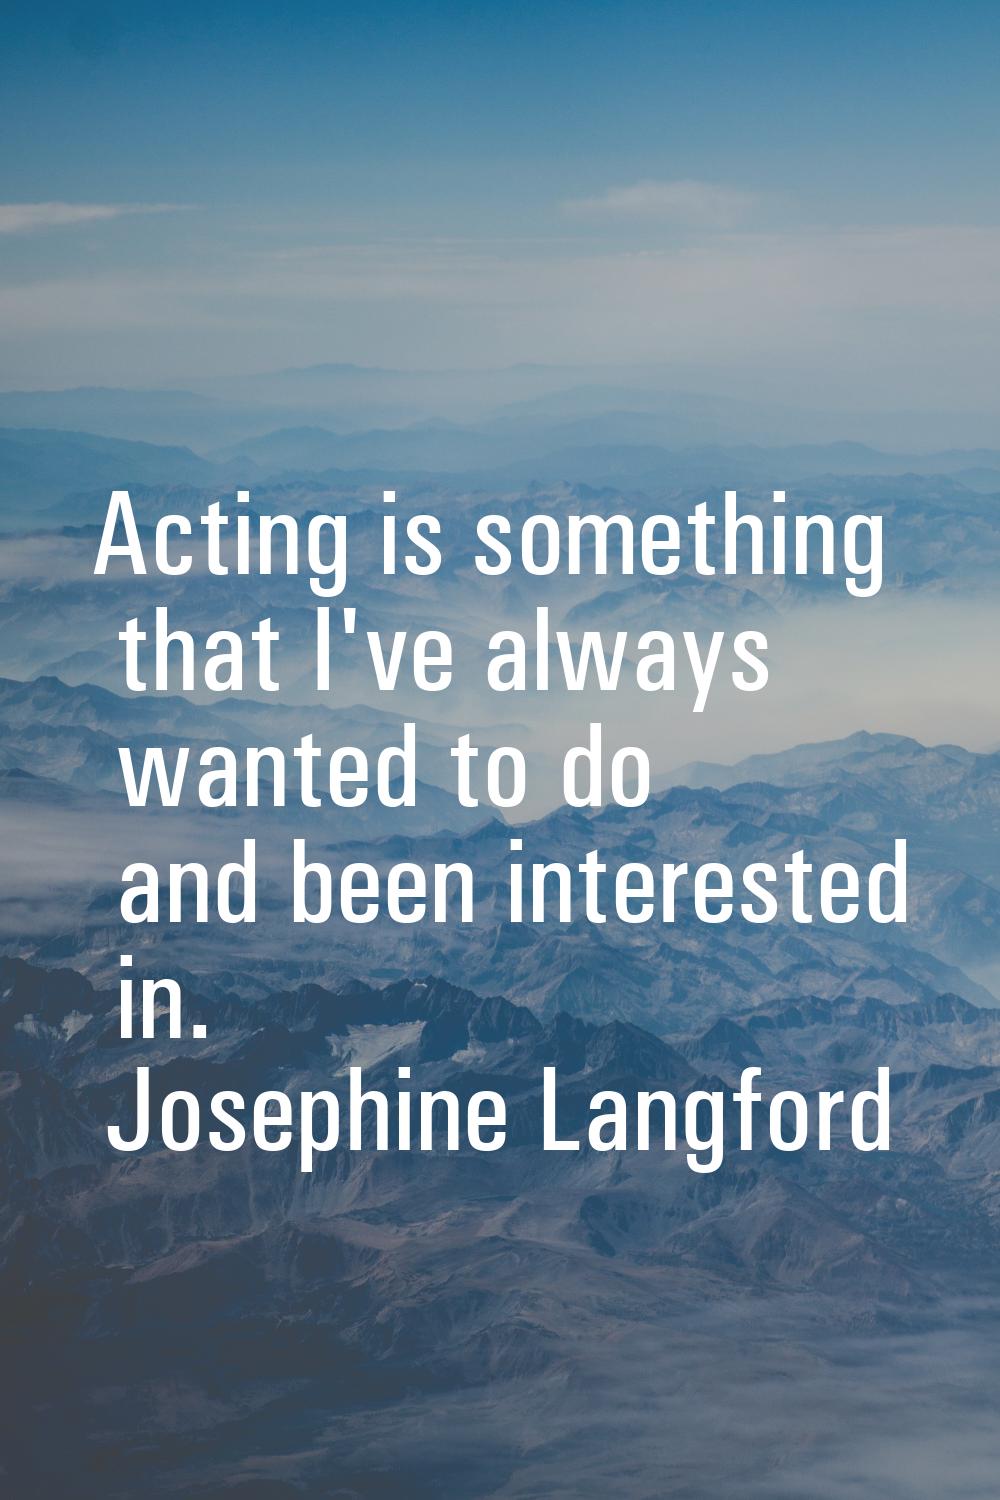 Acting is something that I've always wanted to do and been interested in.